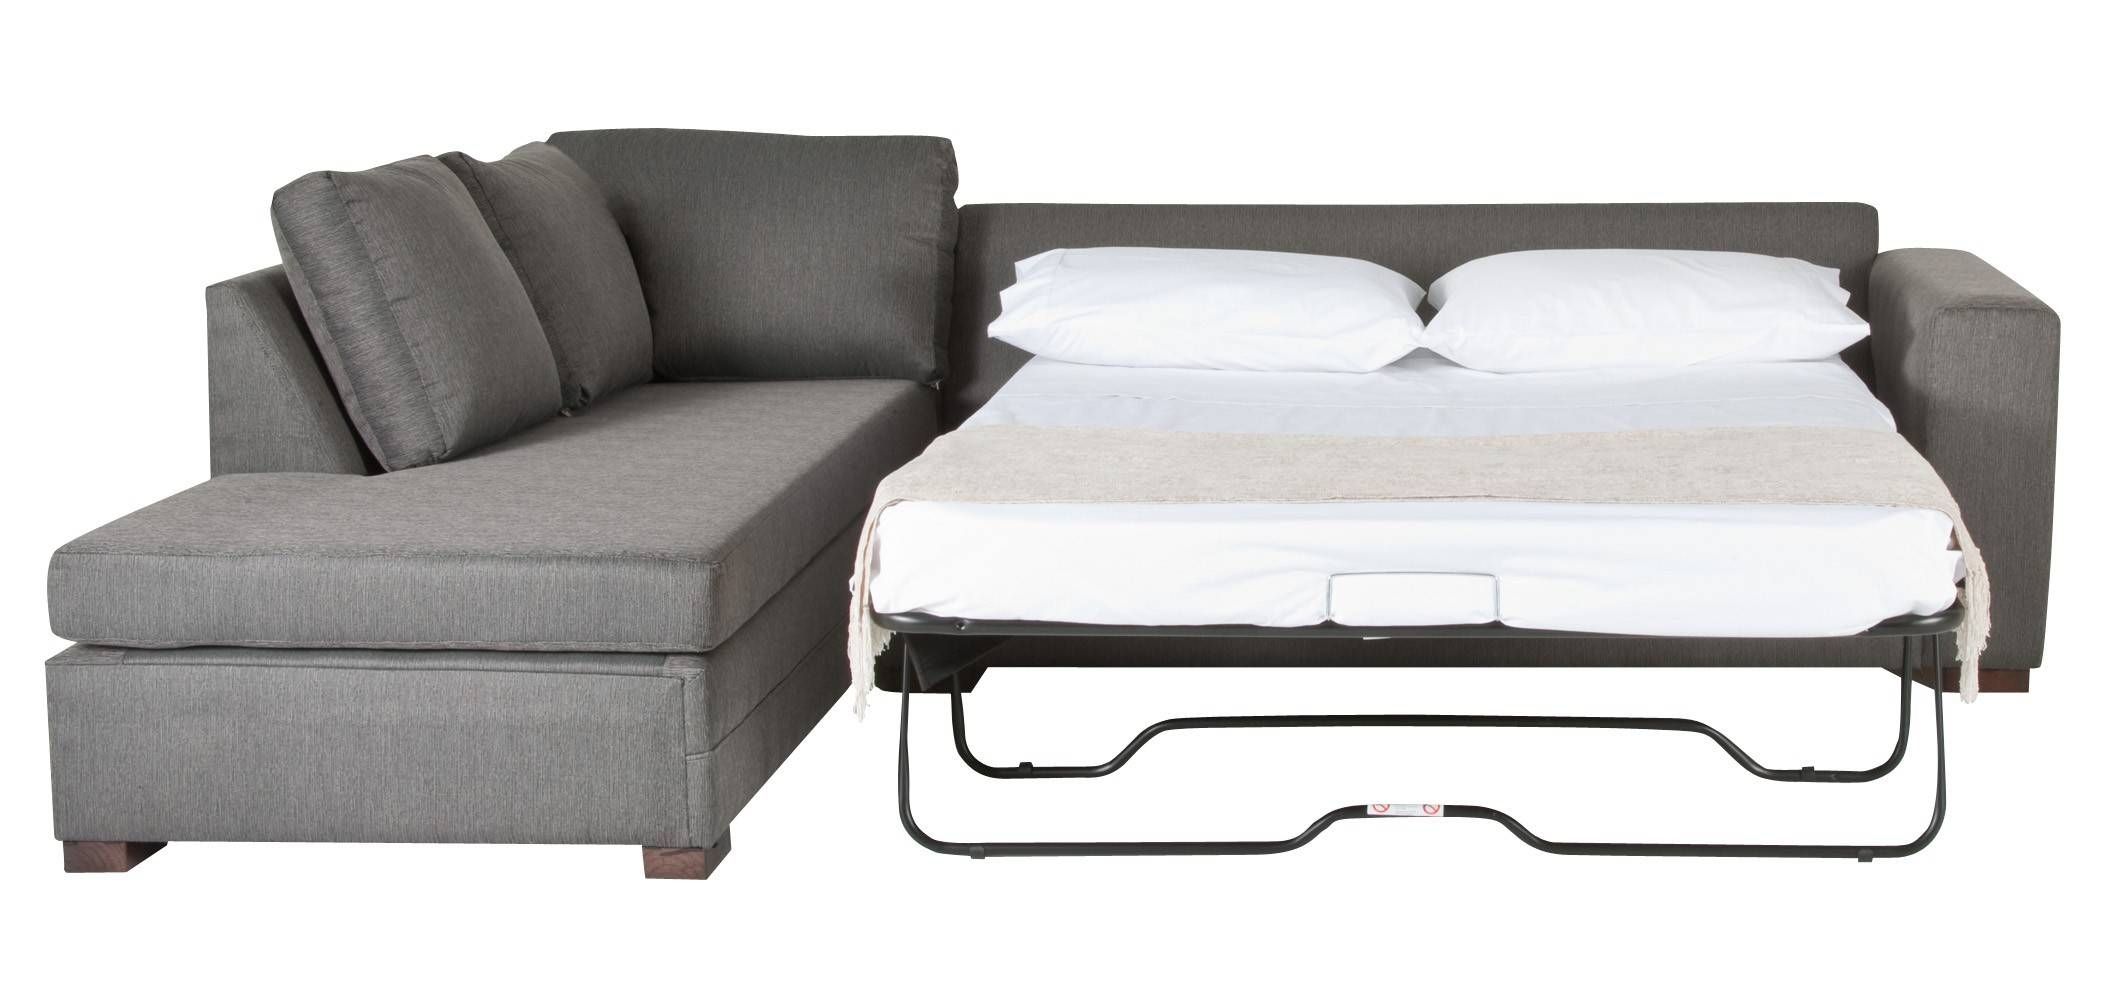 l shape sleeper sofa with pull-out-bed